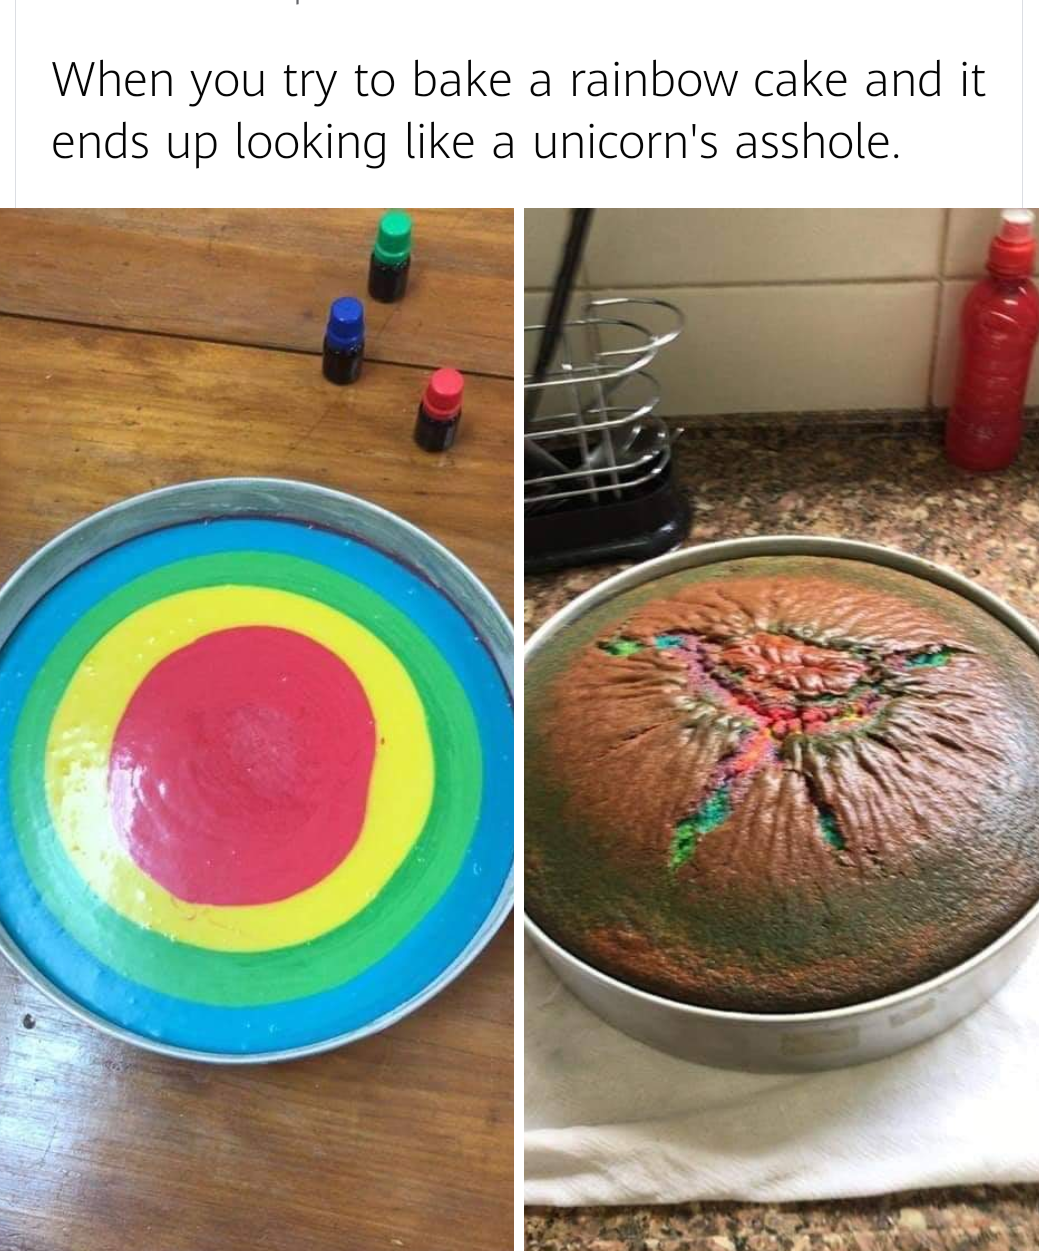 Rainbow cookie - When you try to bake a rainbow cake and it ends up looking a unicorn's asshole.